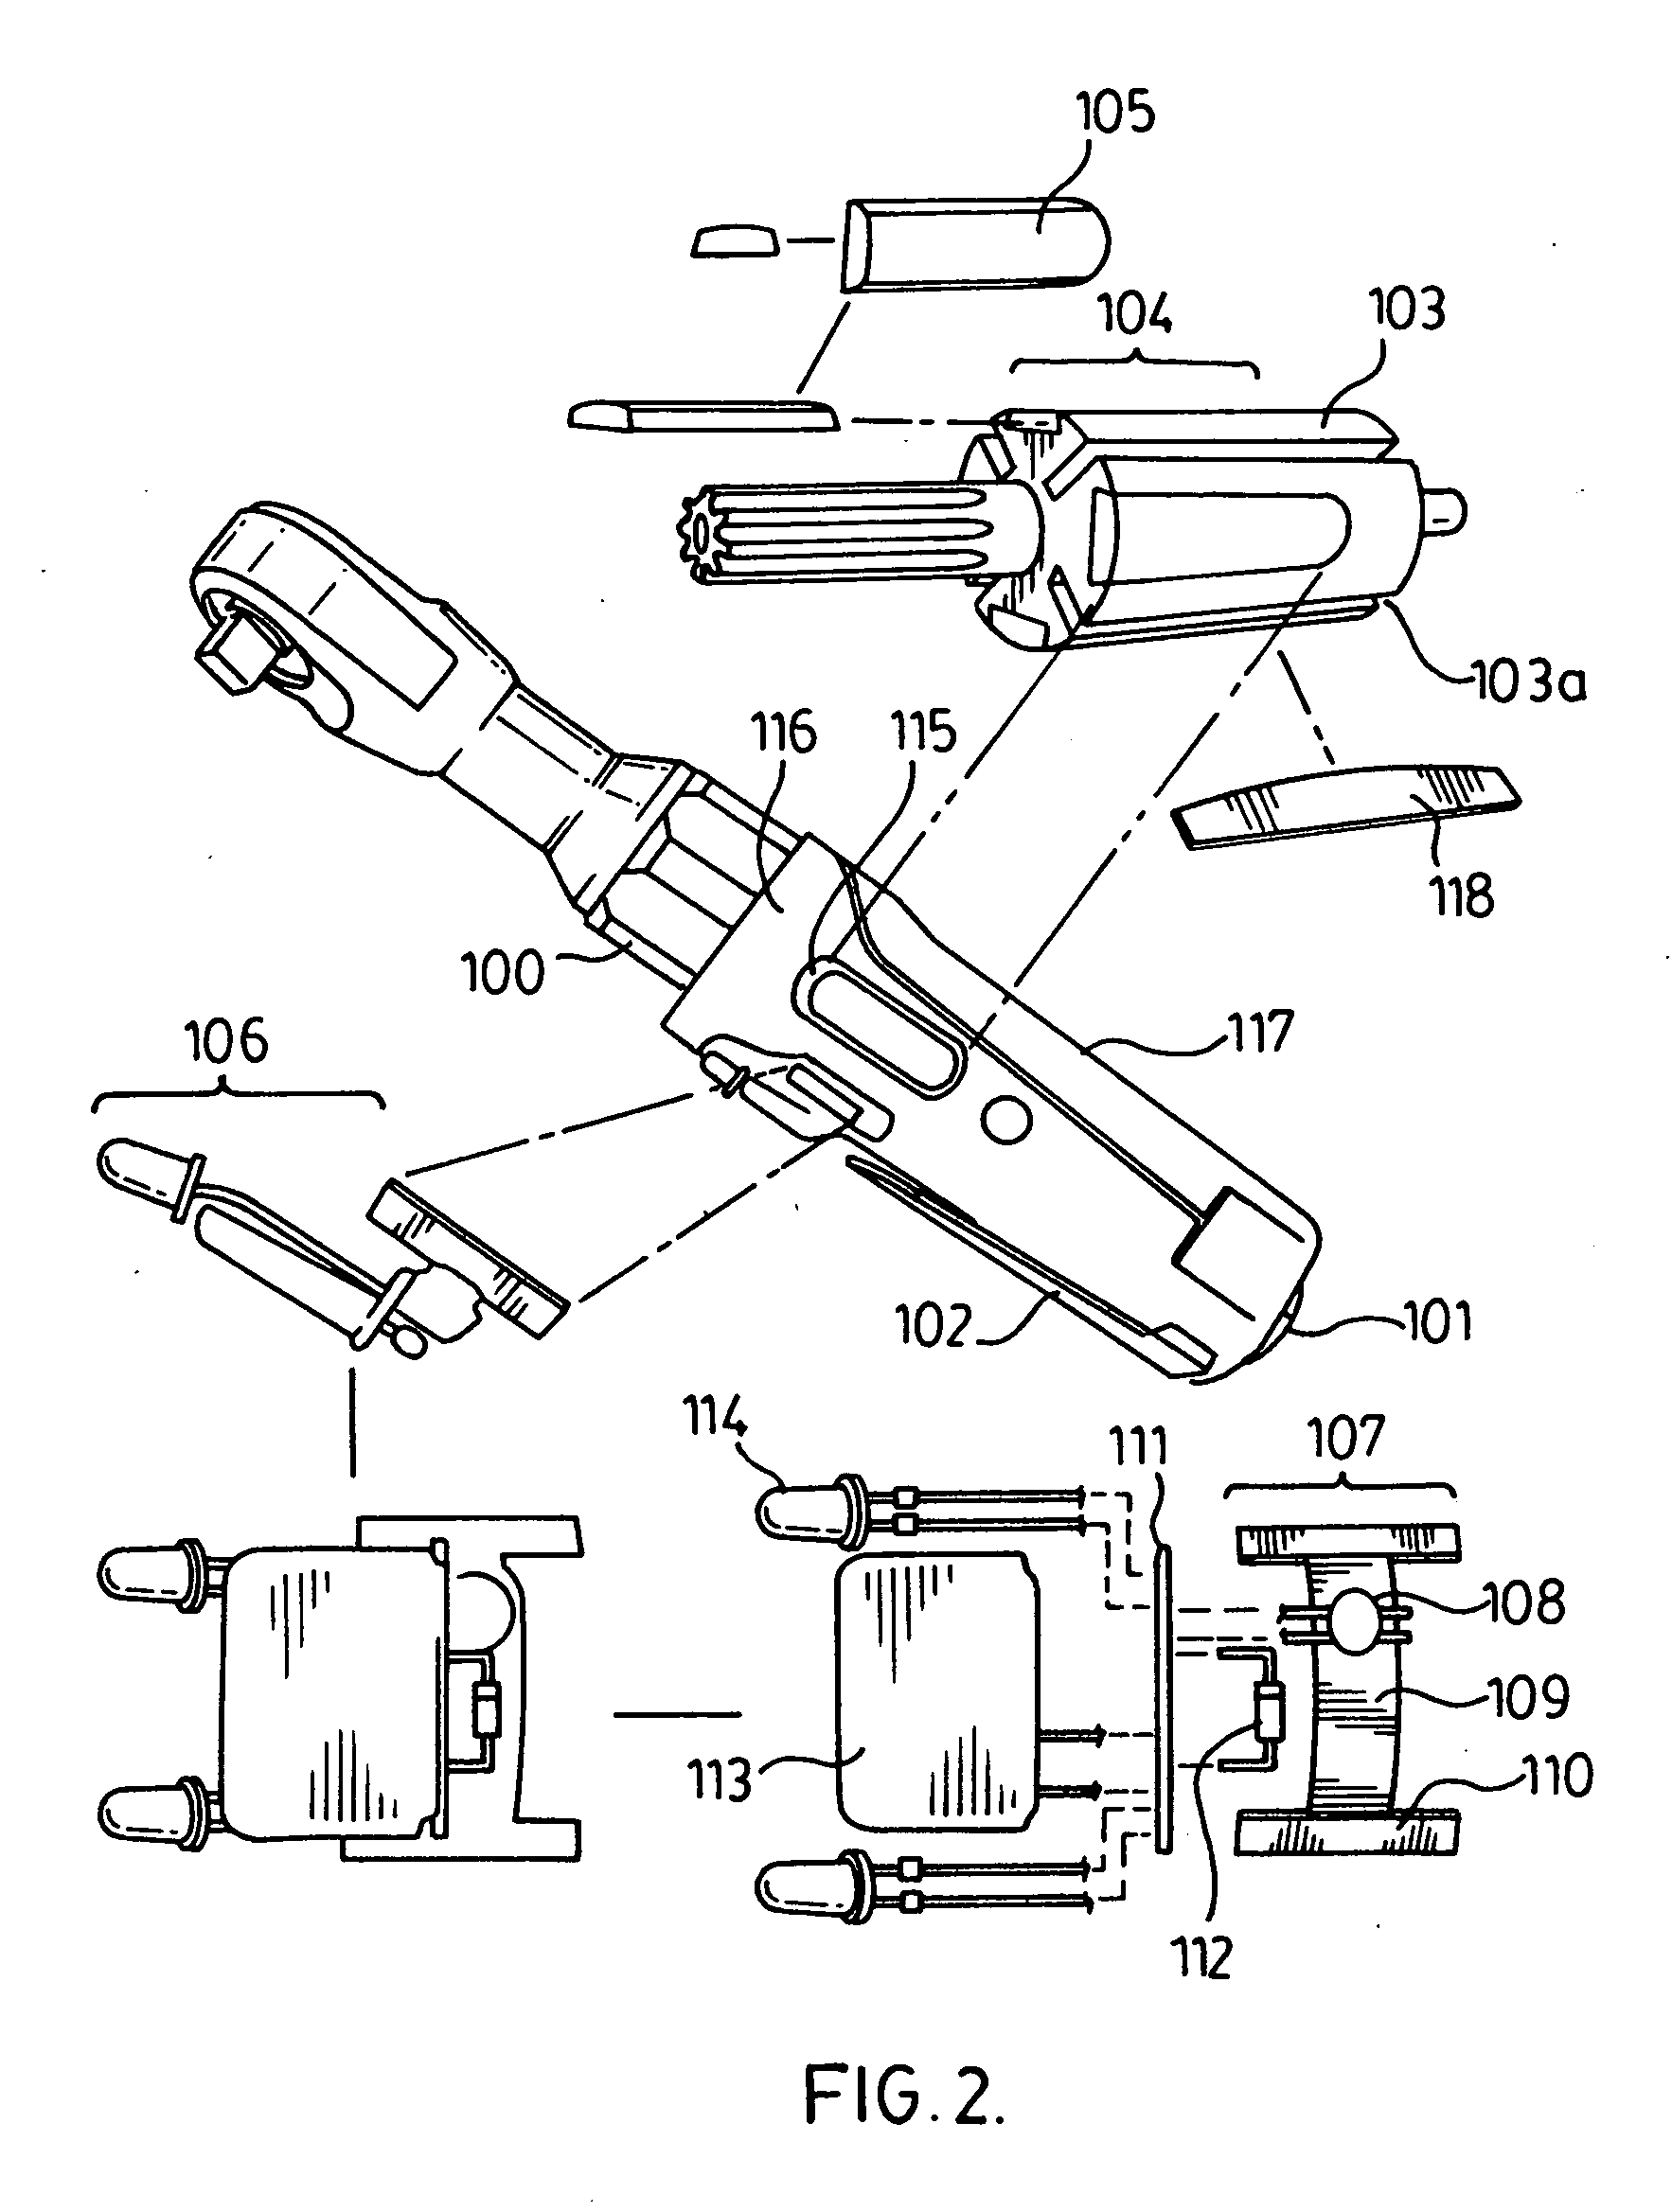 Pneumatic tool having integrated electricity generator with external stator